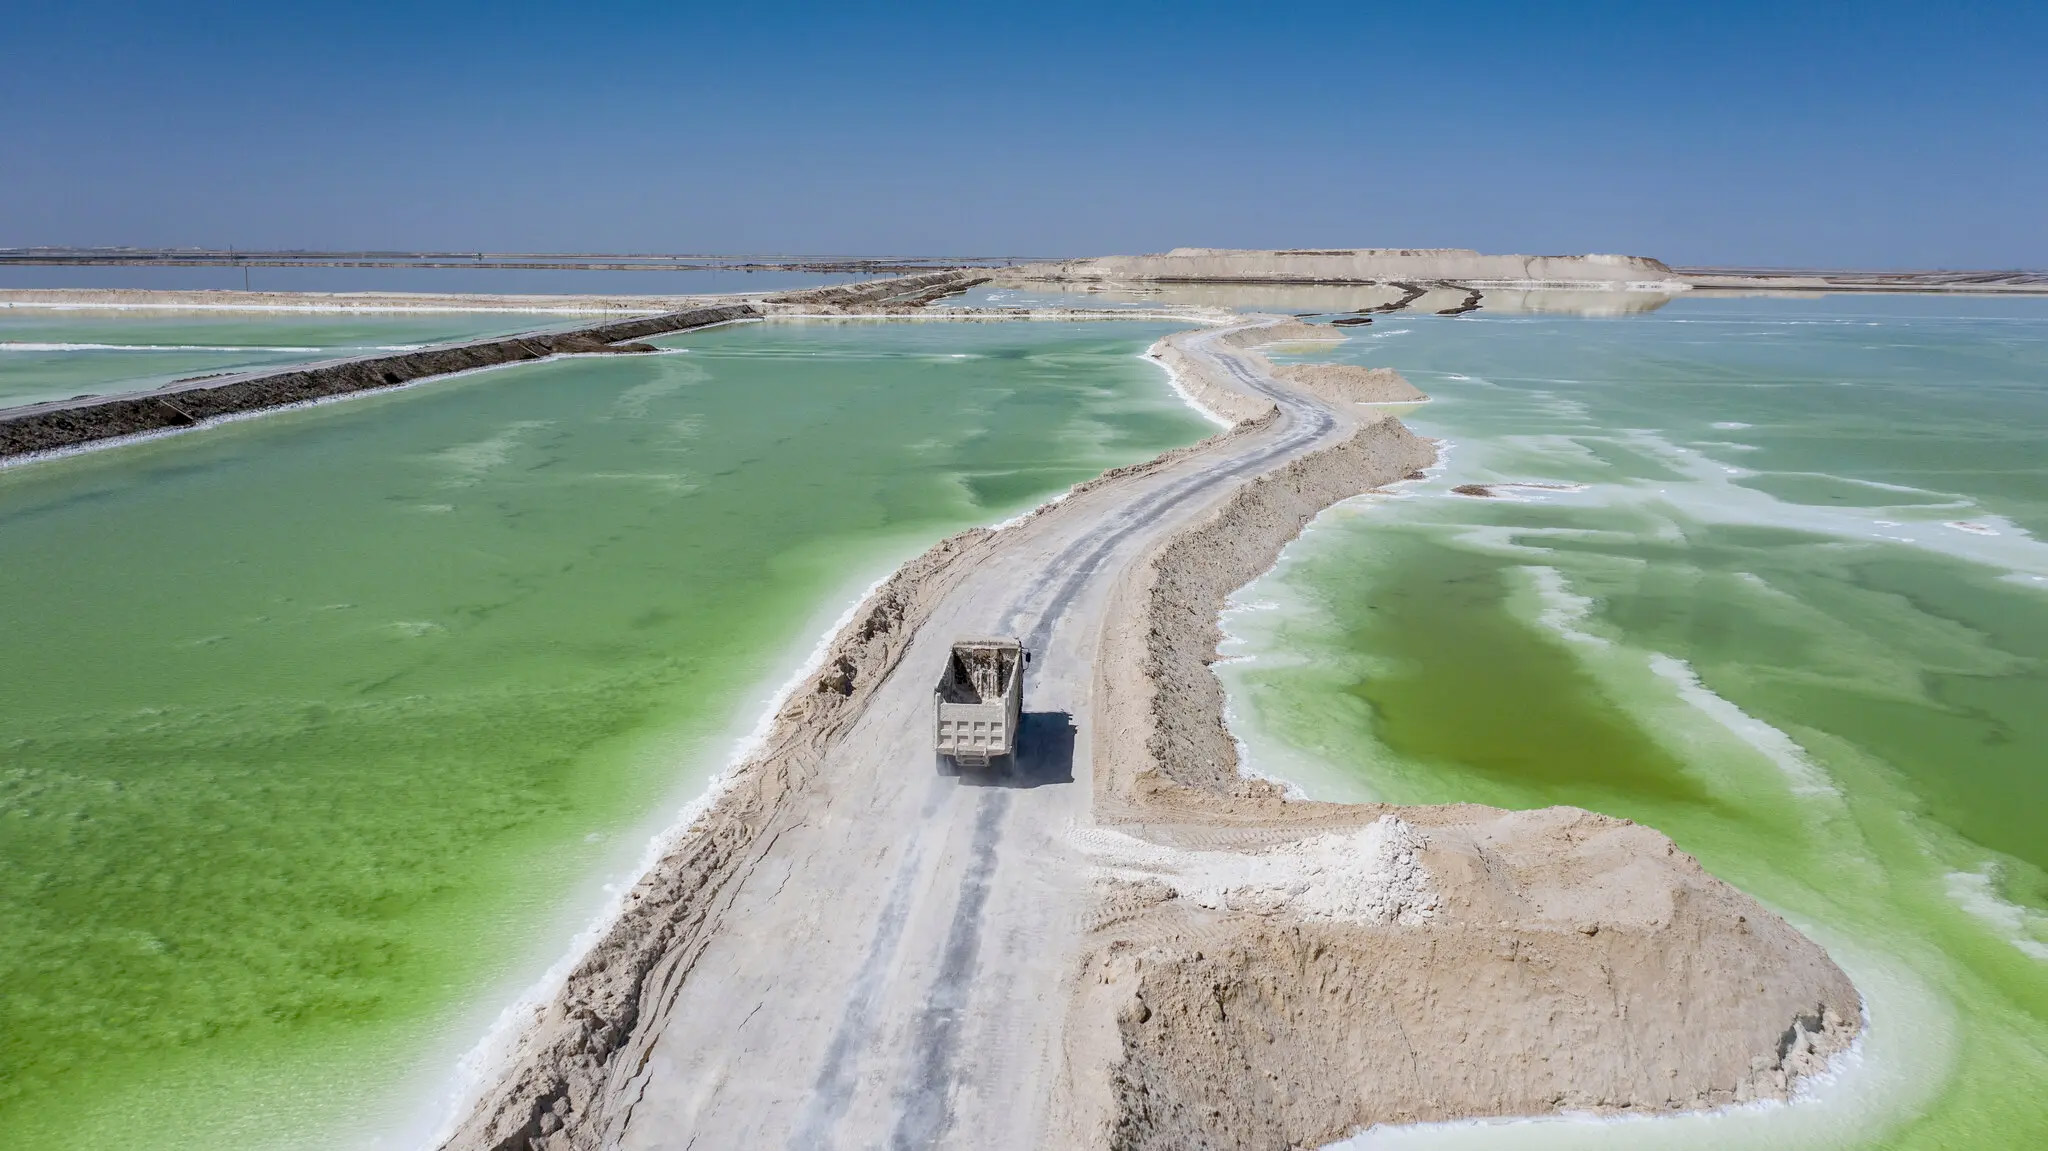 The Chaerhan Salt Lake in western China, a source of lithium, magnesium and potassium. China dominates the refining and processing of lithium and other metals needed to produce electric-car batteries. Credit...Qilai Shen for The New York Times